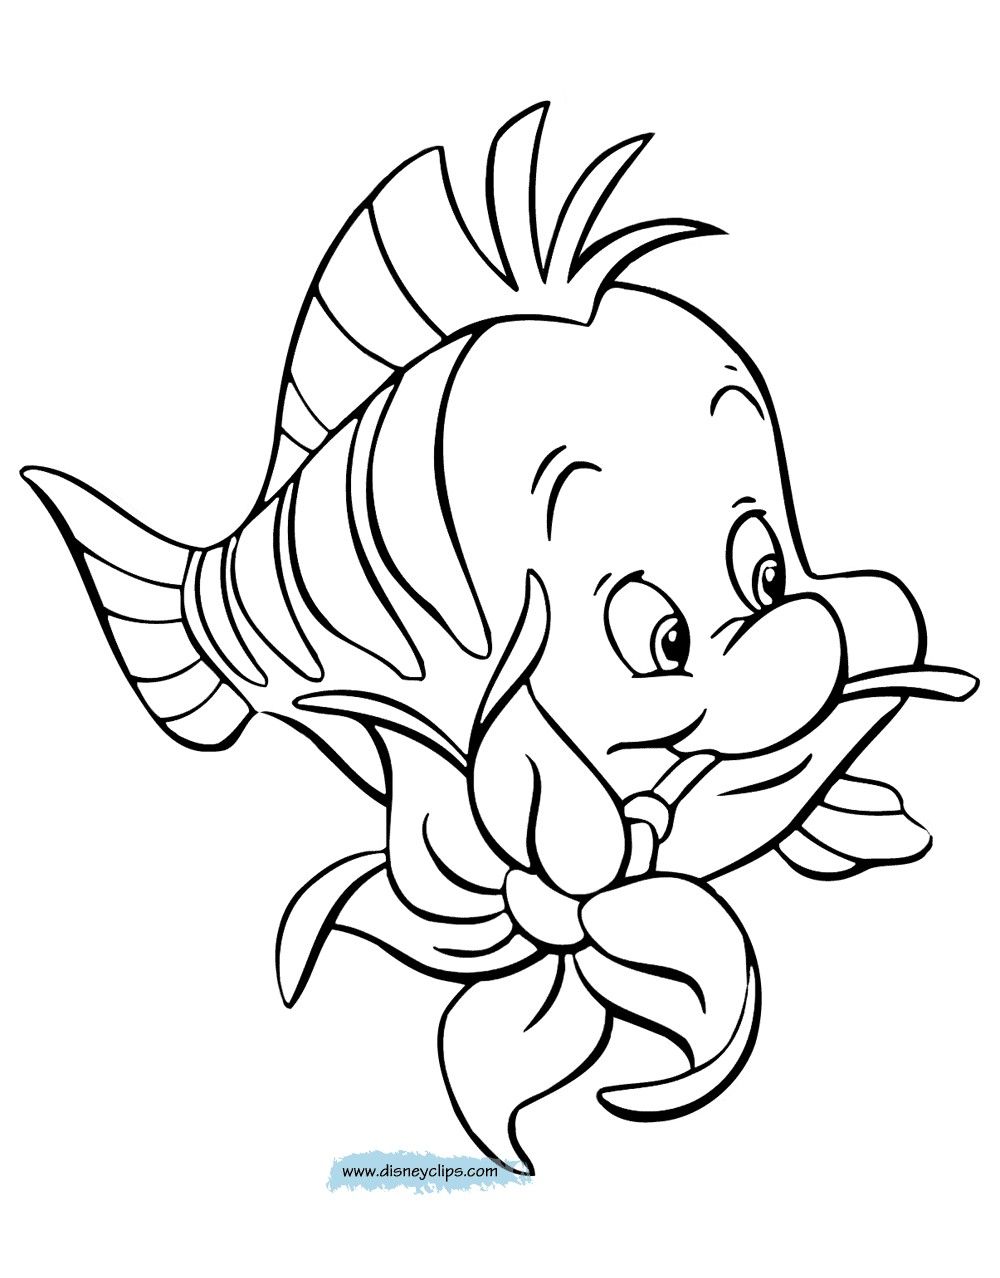 Flounder Coloring Pages From The Little Mermaid at GetColorings.com ...